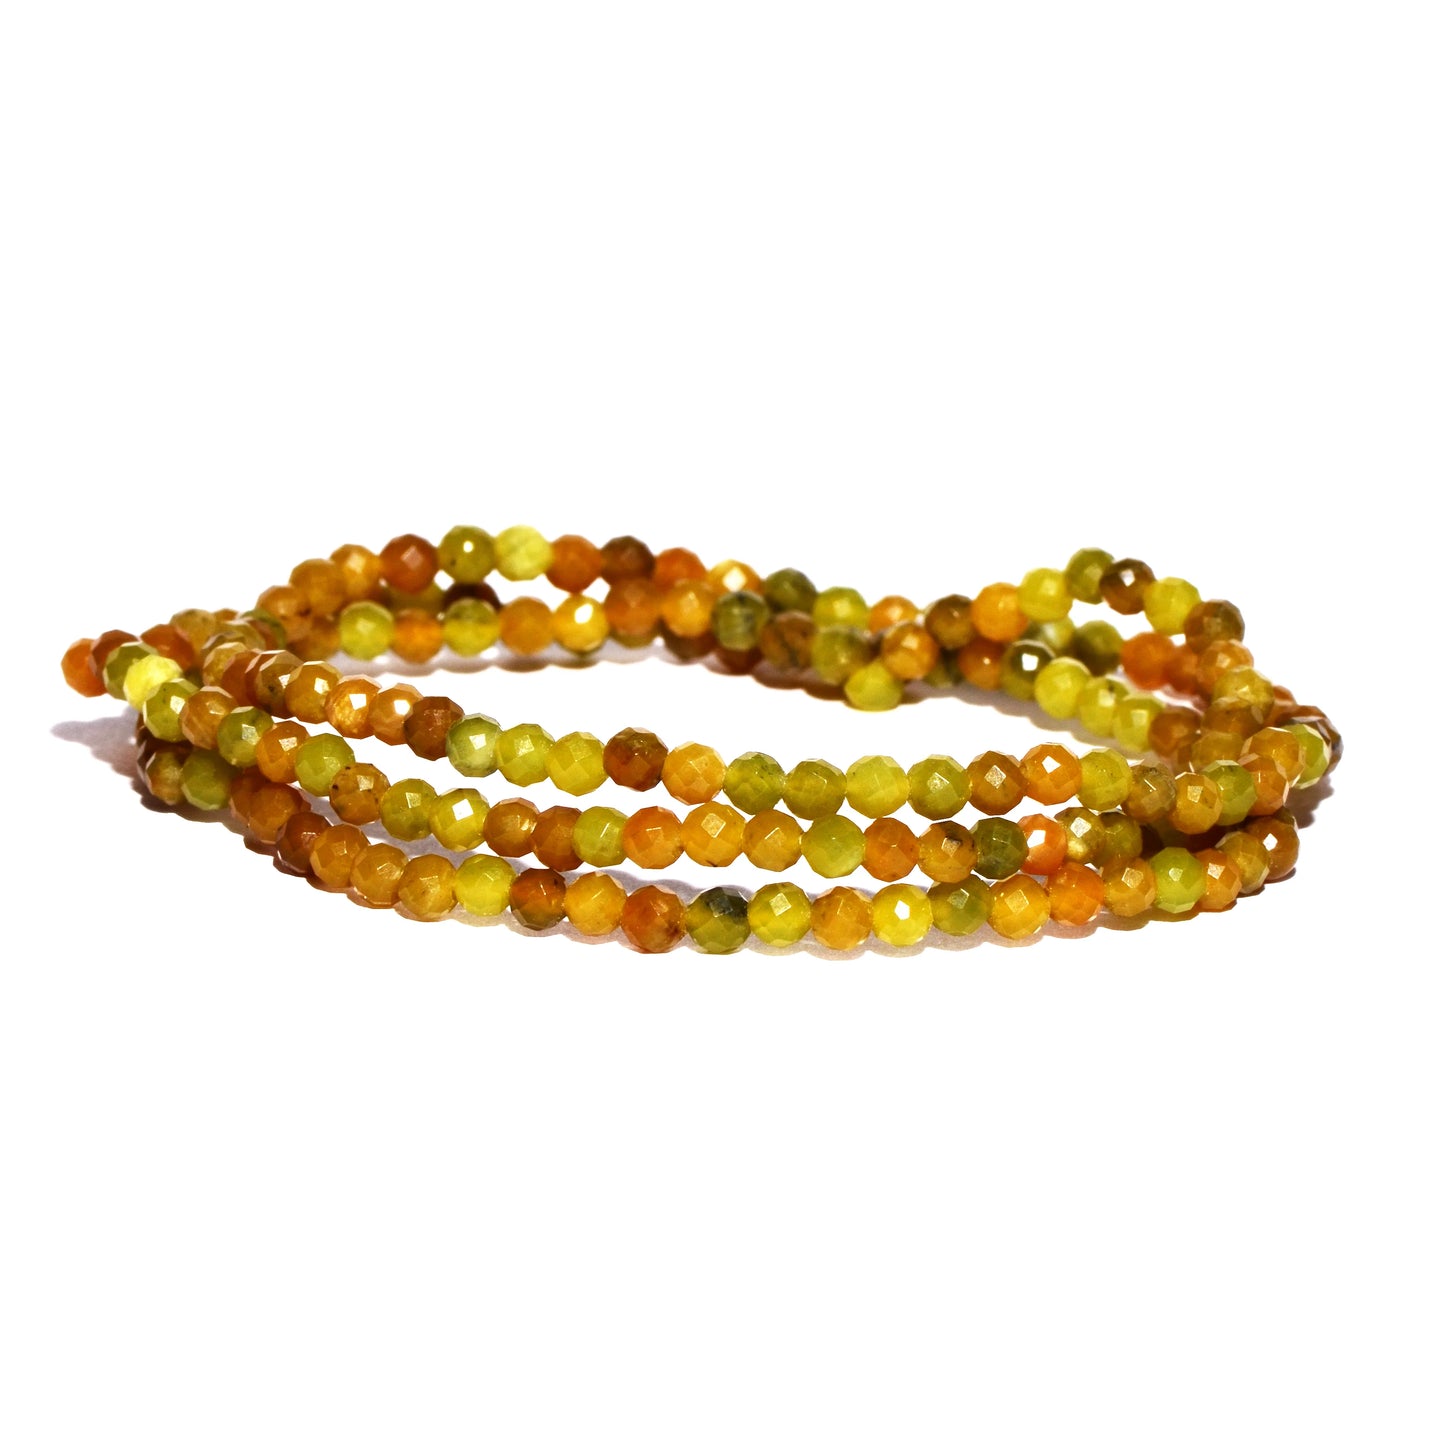 Buy Chrysoprase 3mm Faceted Beaded Bracelet to assist with Self-Healing